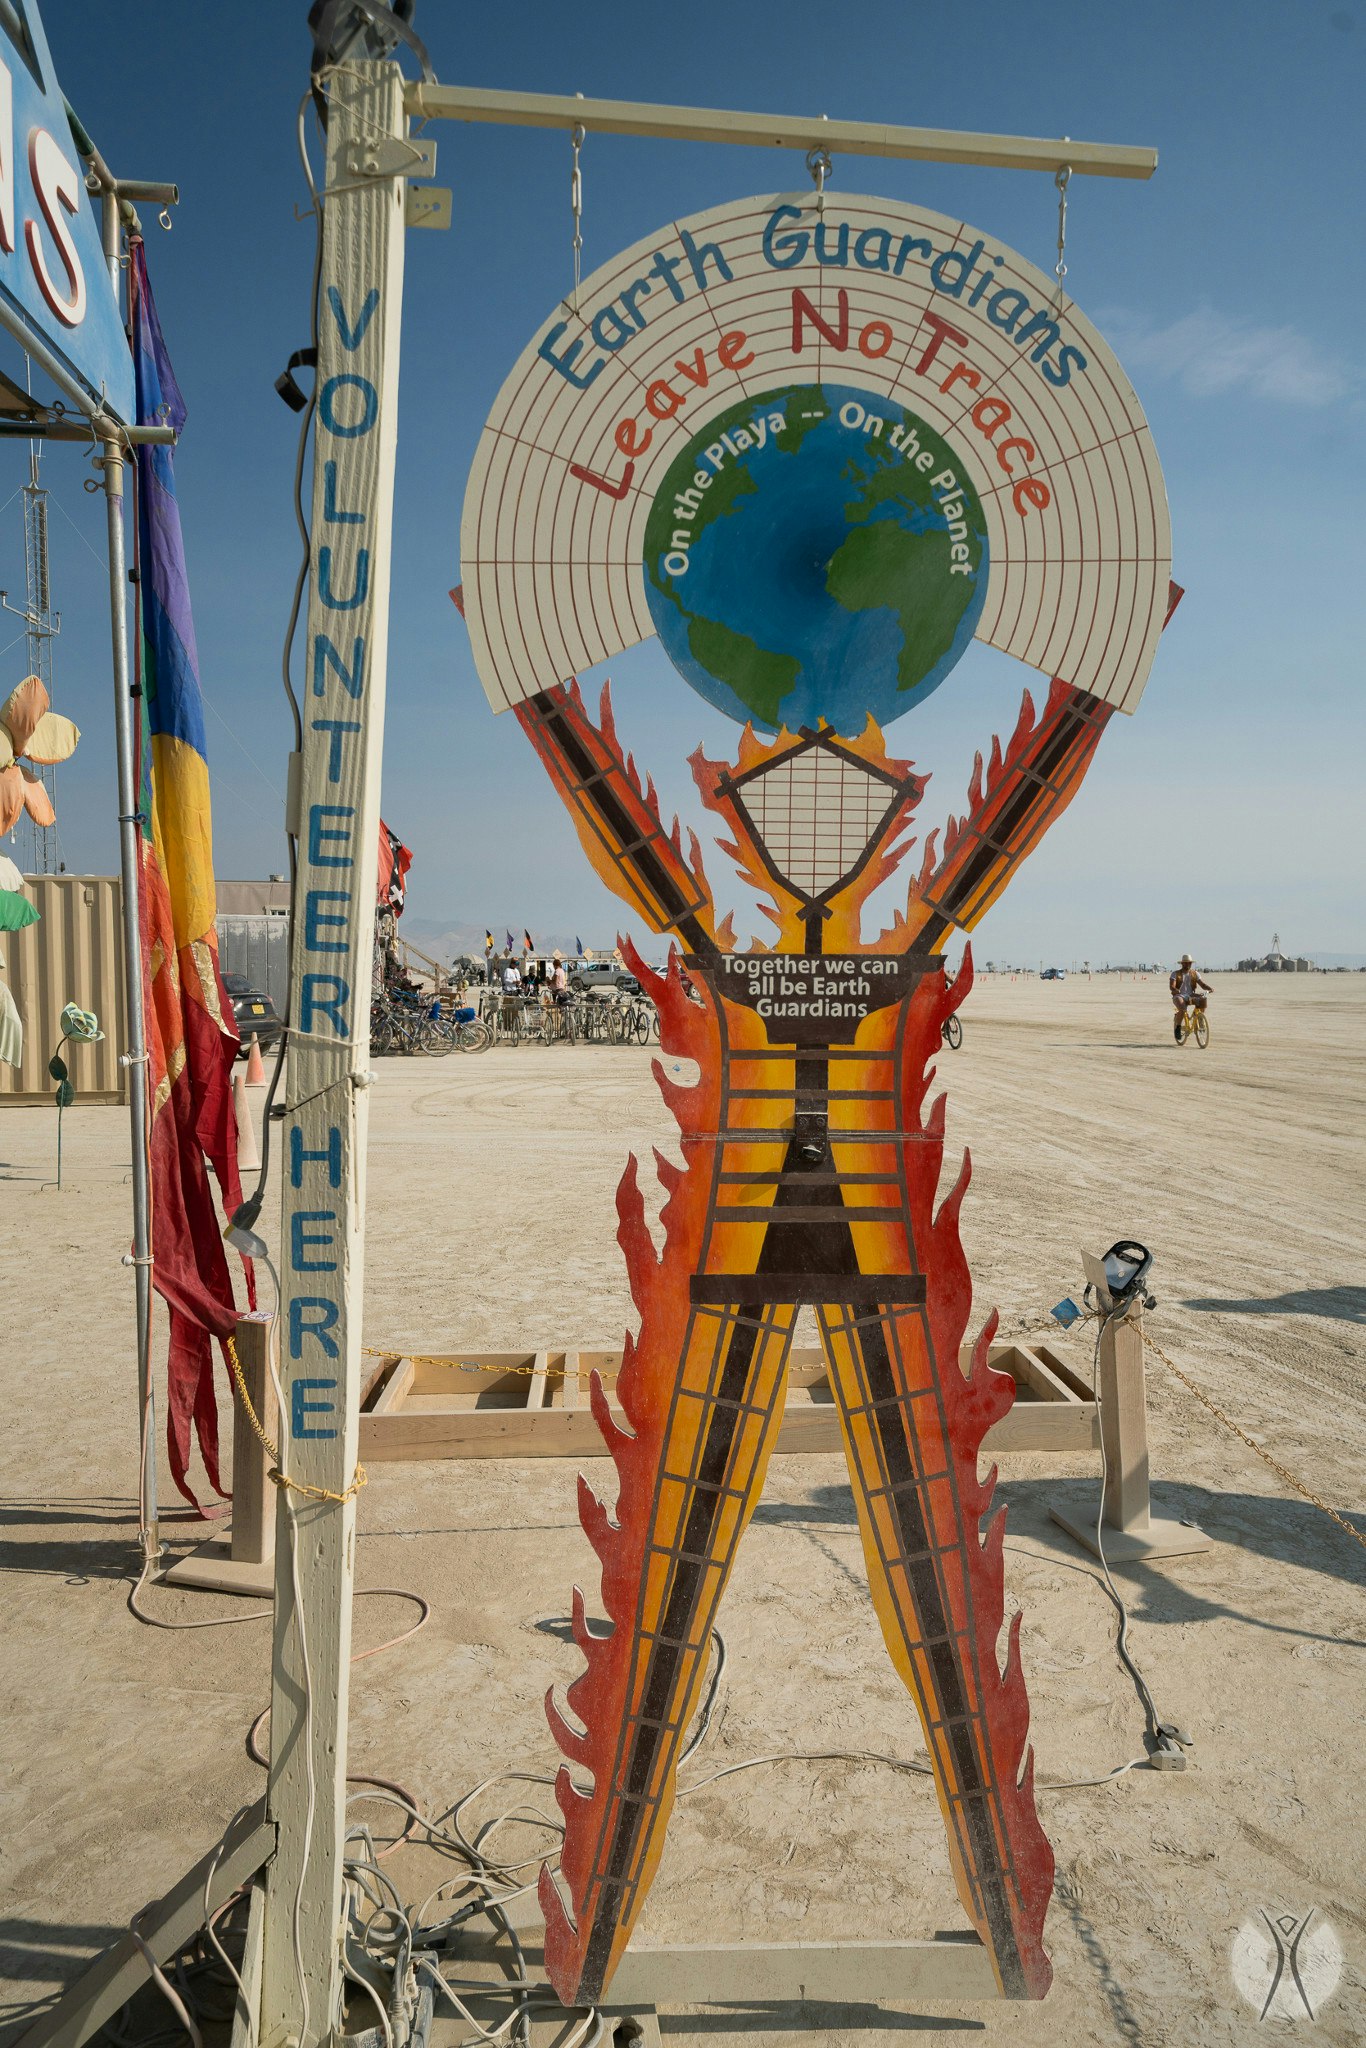 A sign for the Earth Guardians promotes sustainability at Burning Man. 